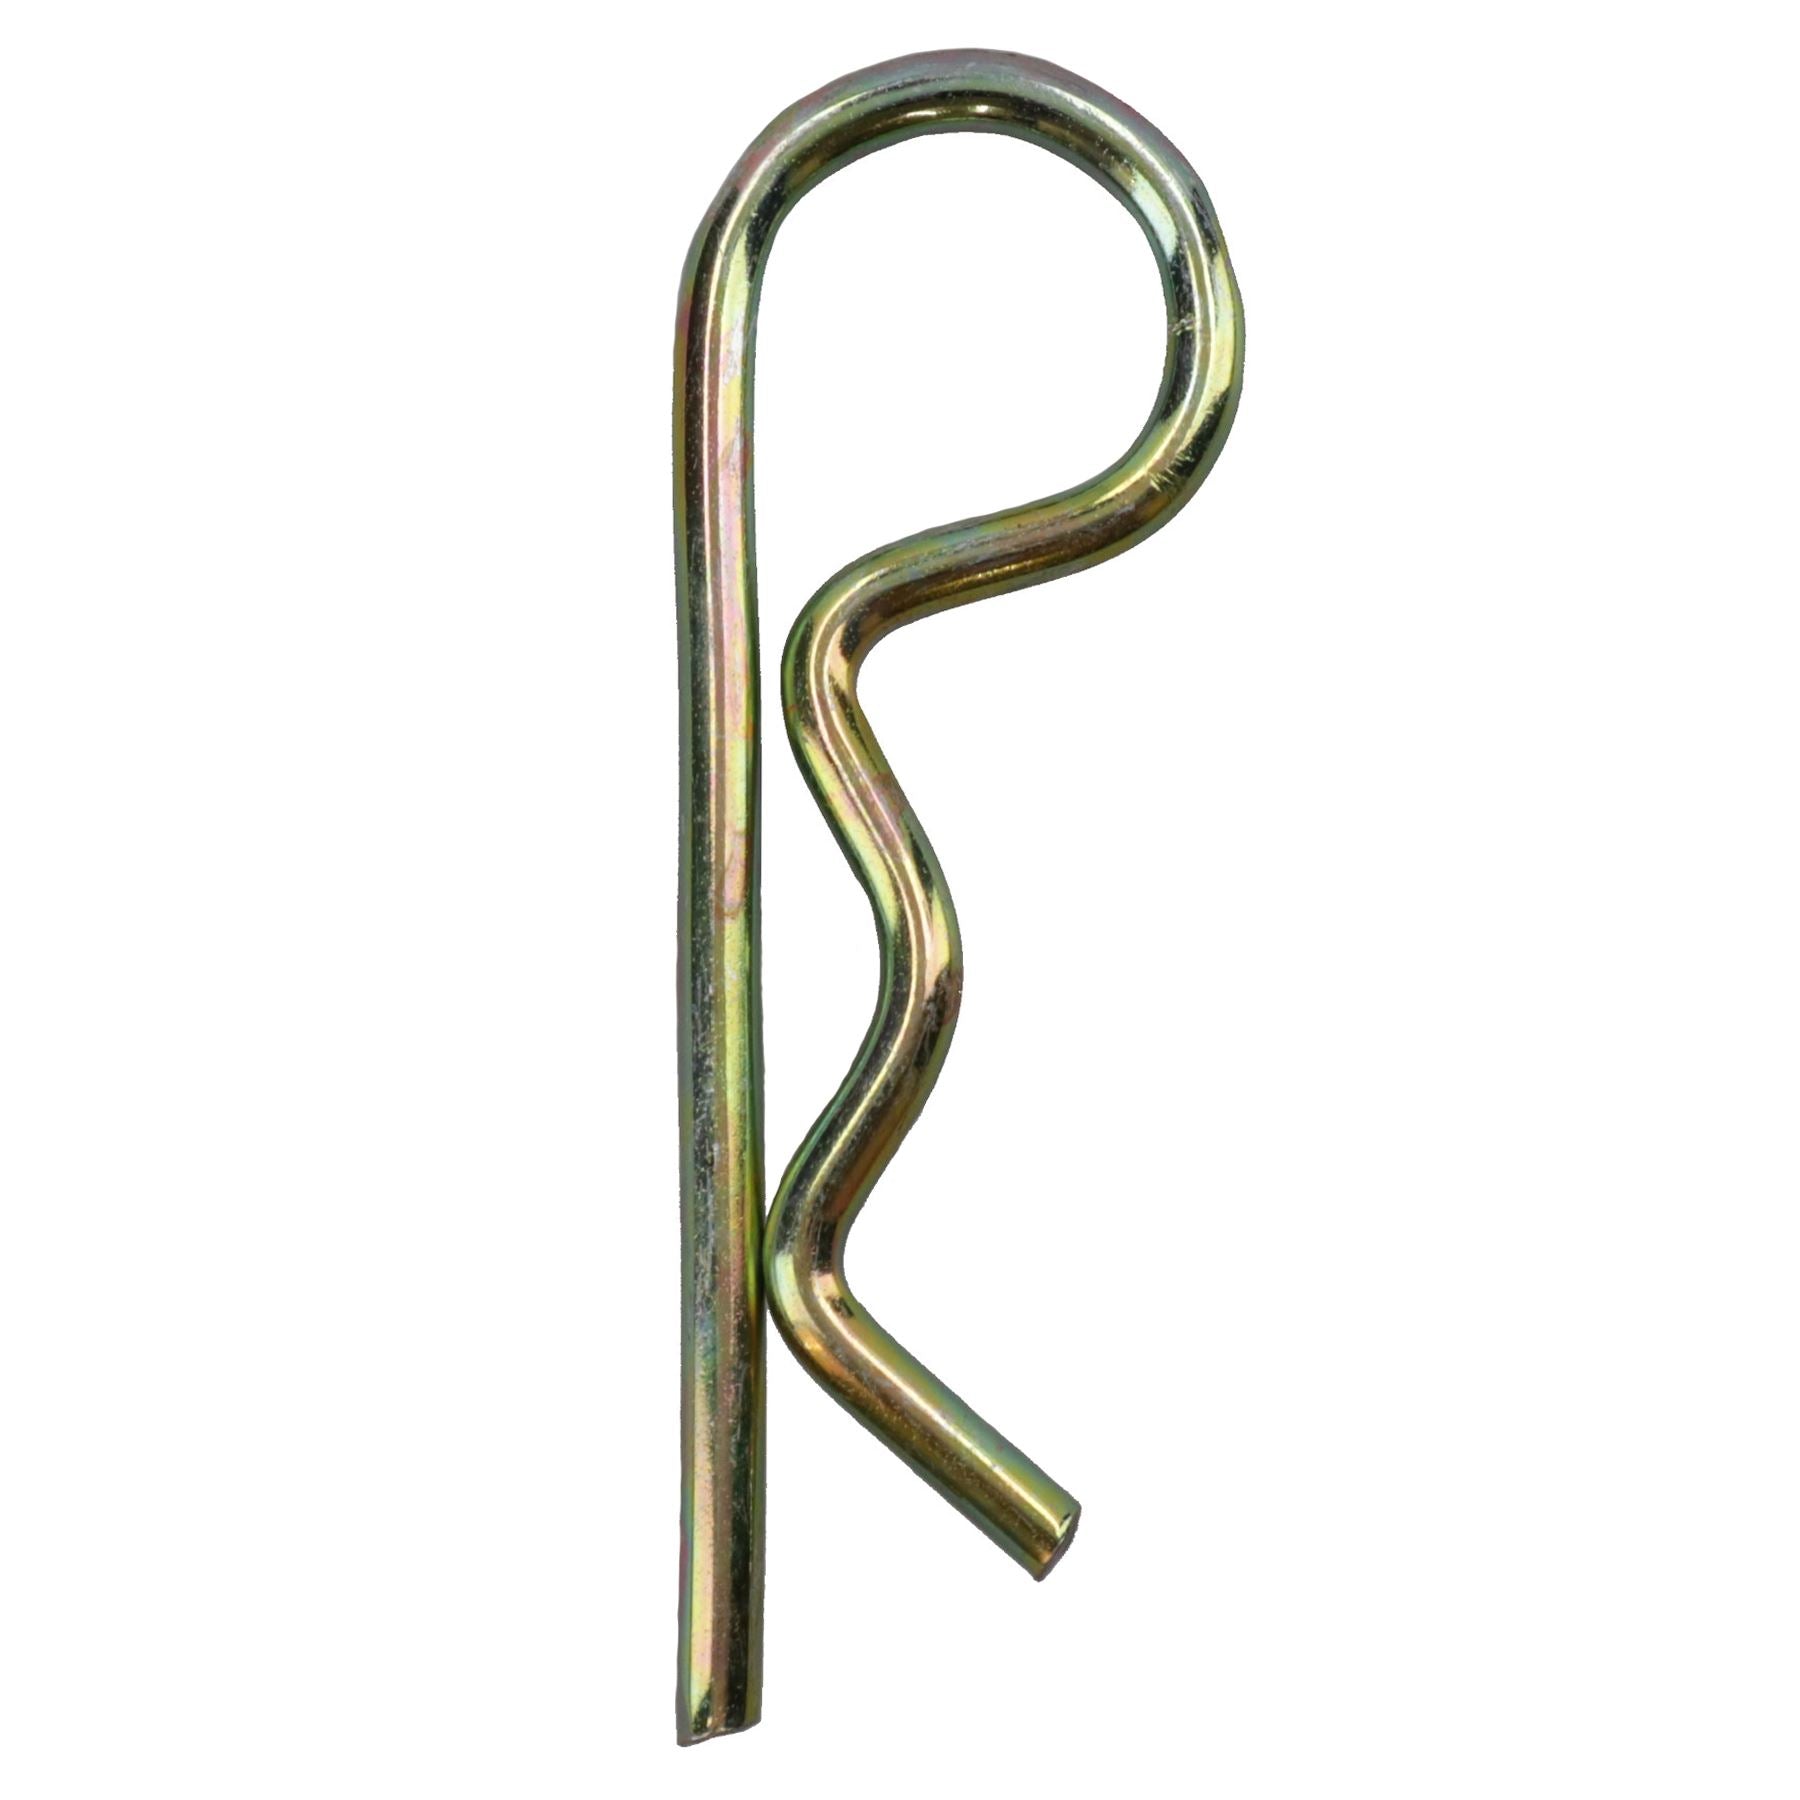 7mm R Clips Hair Pin Spring Cotter Pin Hitch Lynch Cotter Zinc Plated Steel